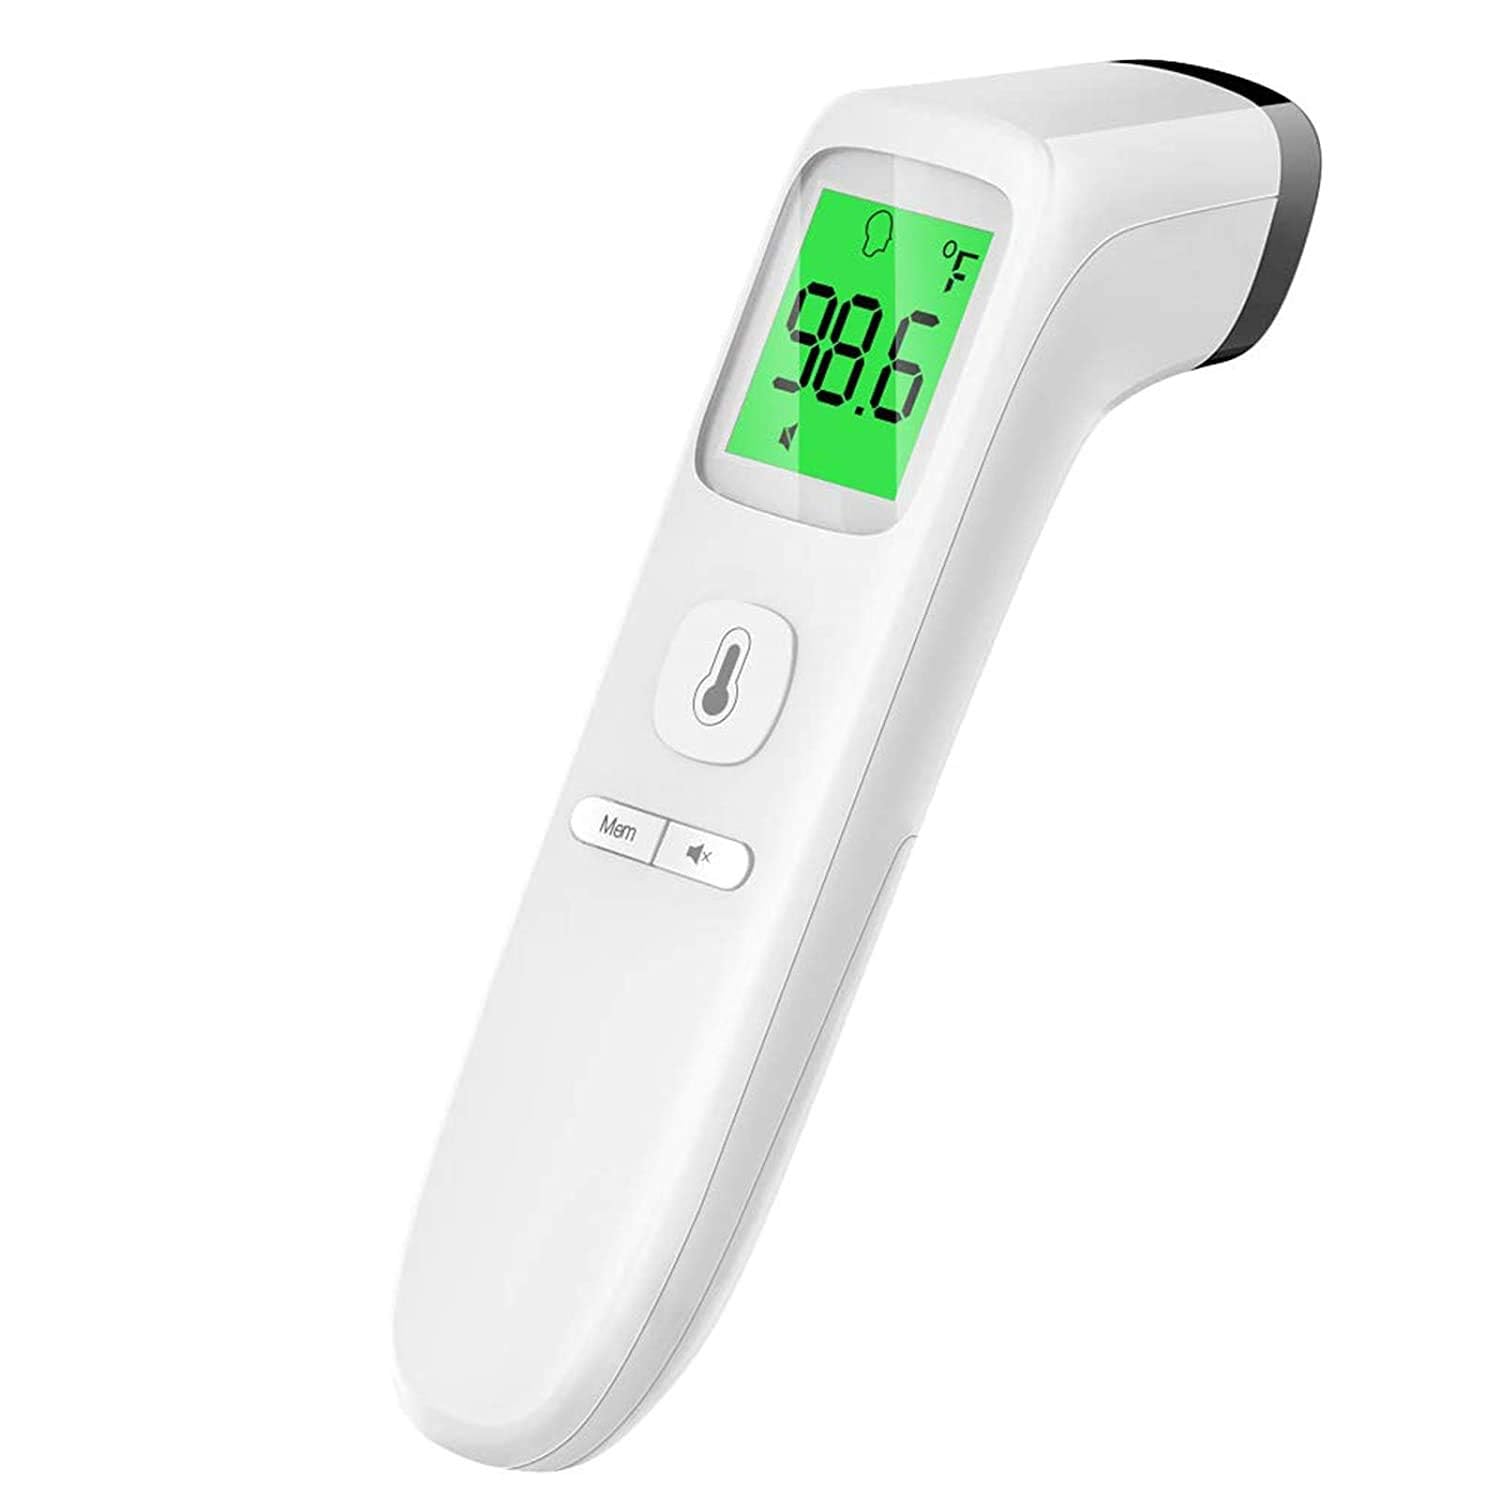 Thermometer for Adults, No-Touch Baby Thermometer, Infrared Digital Thermometer for Kids, Accurate Reading with Large LCD Screen, Fever Alarm